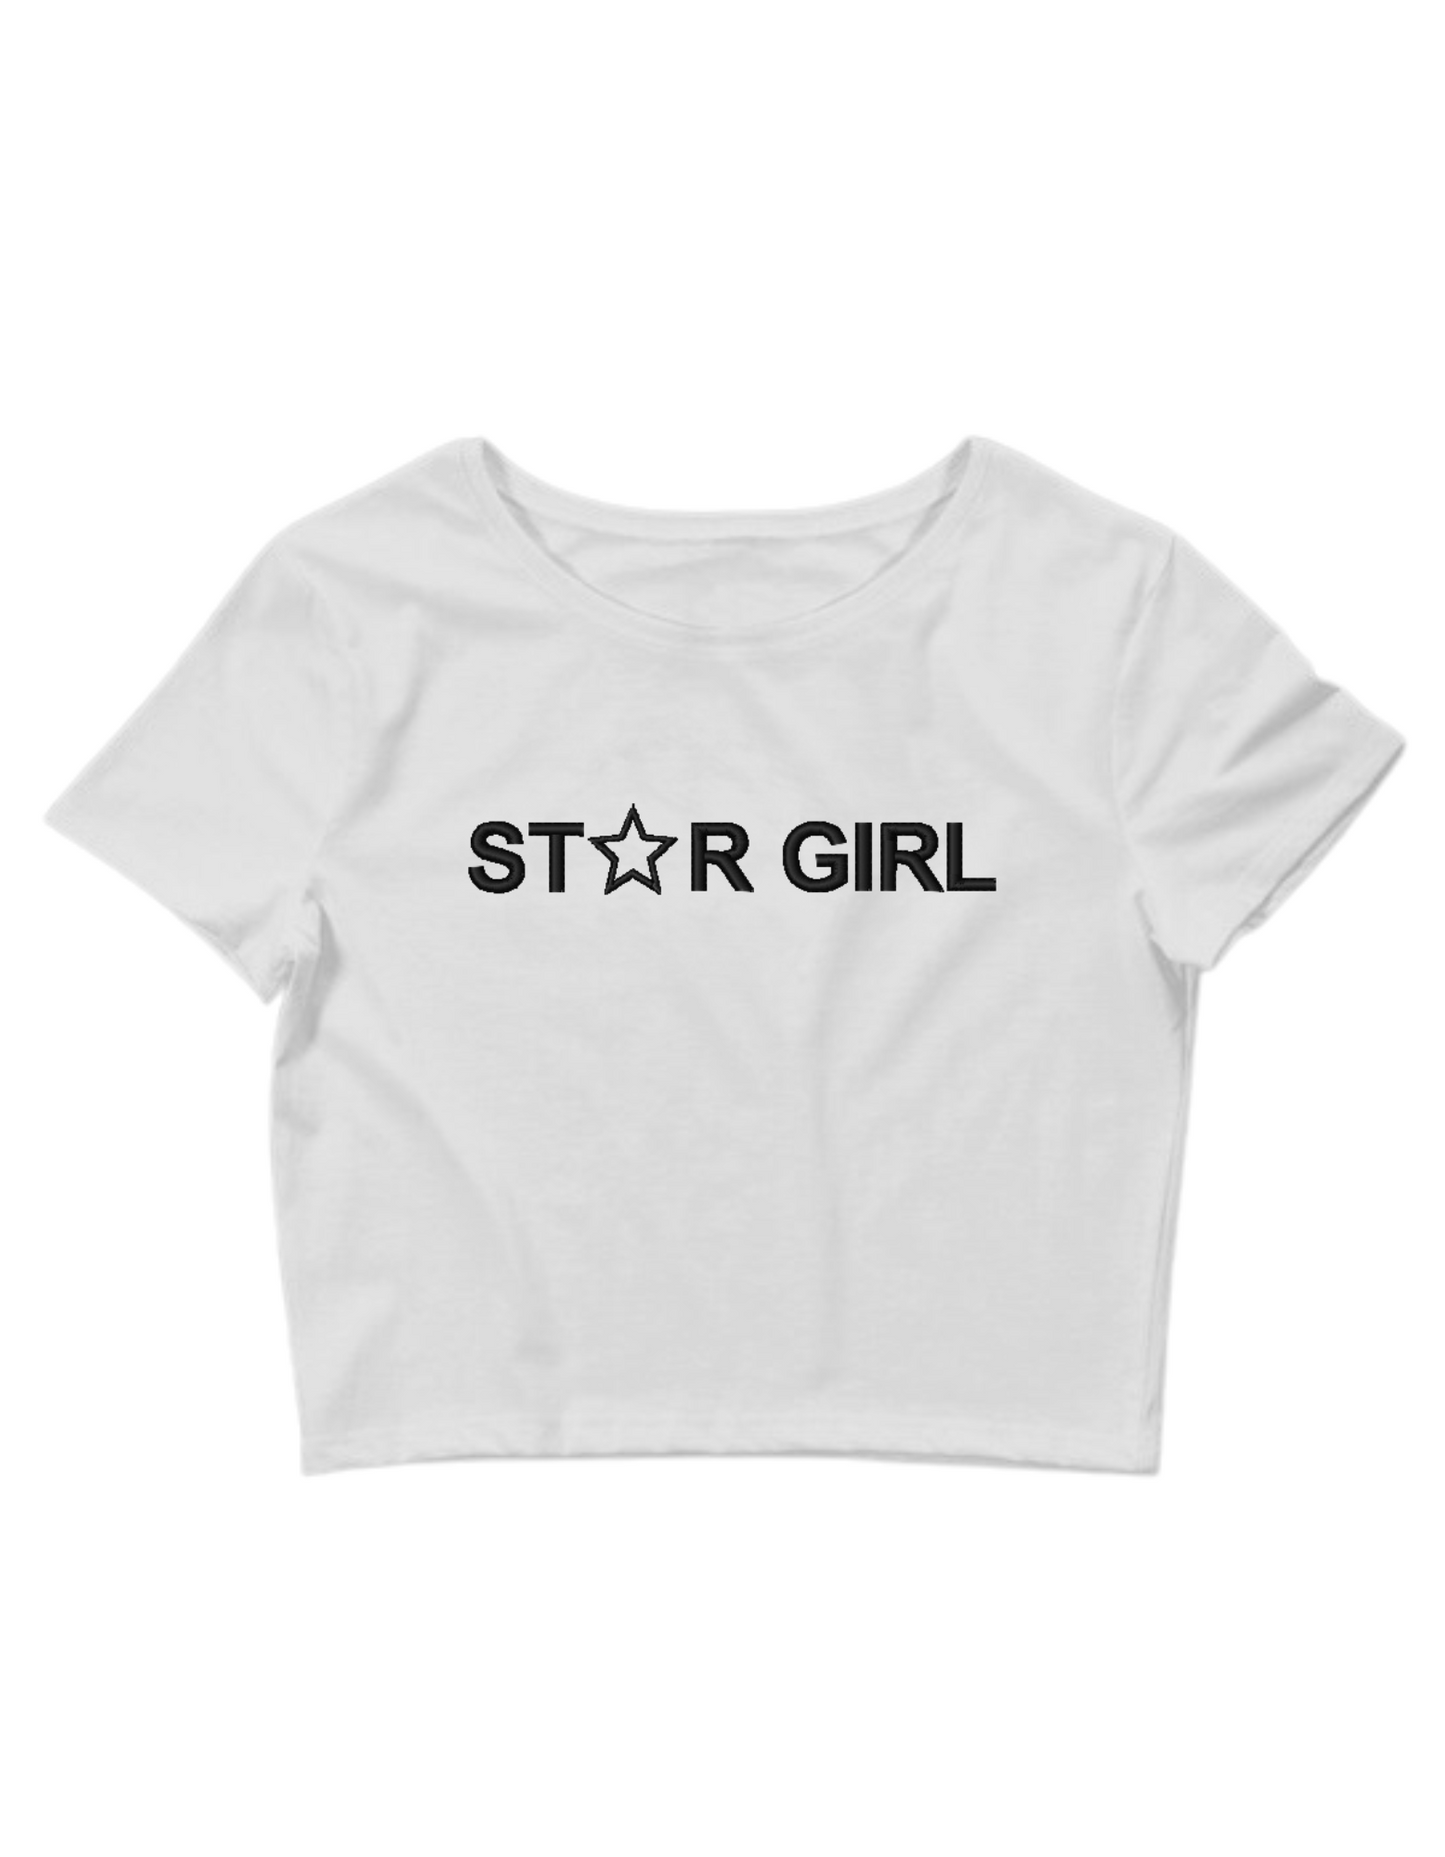 Embroidered "Star Girl" Cropped Baby T, Petite fit, Short Sleeve, Female, Adult